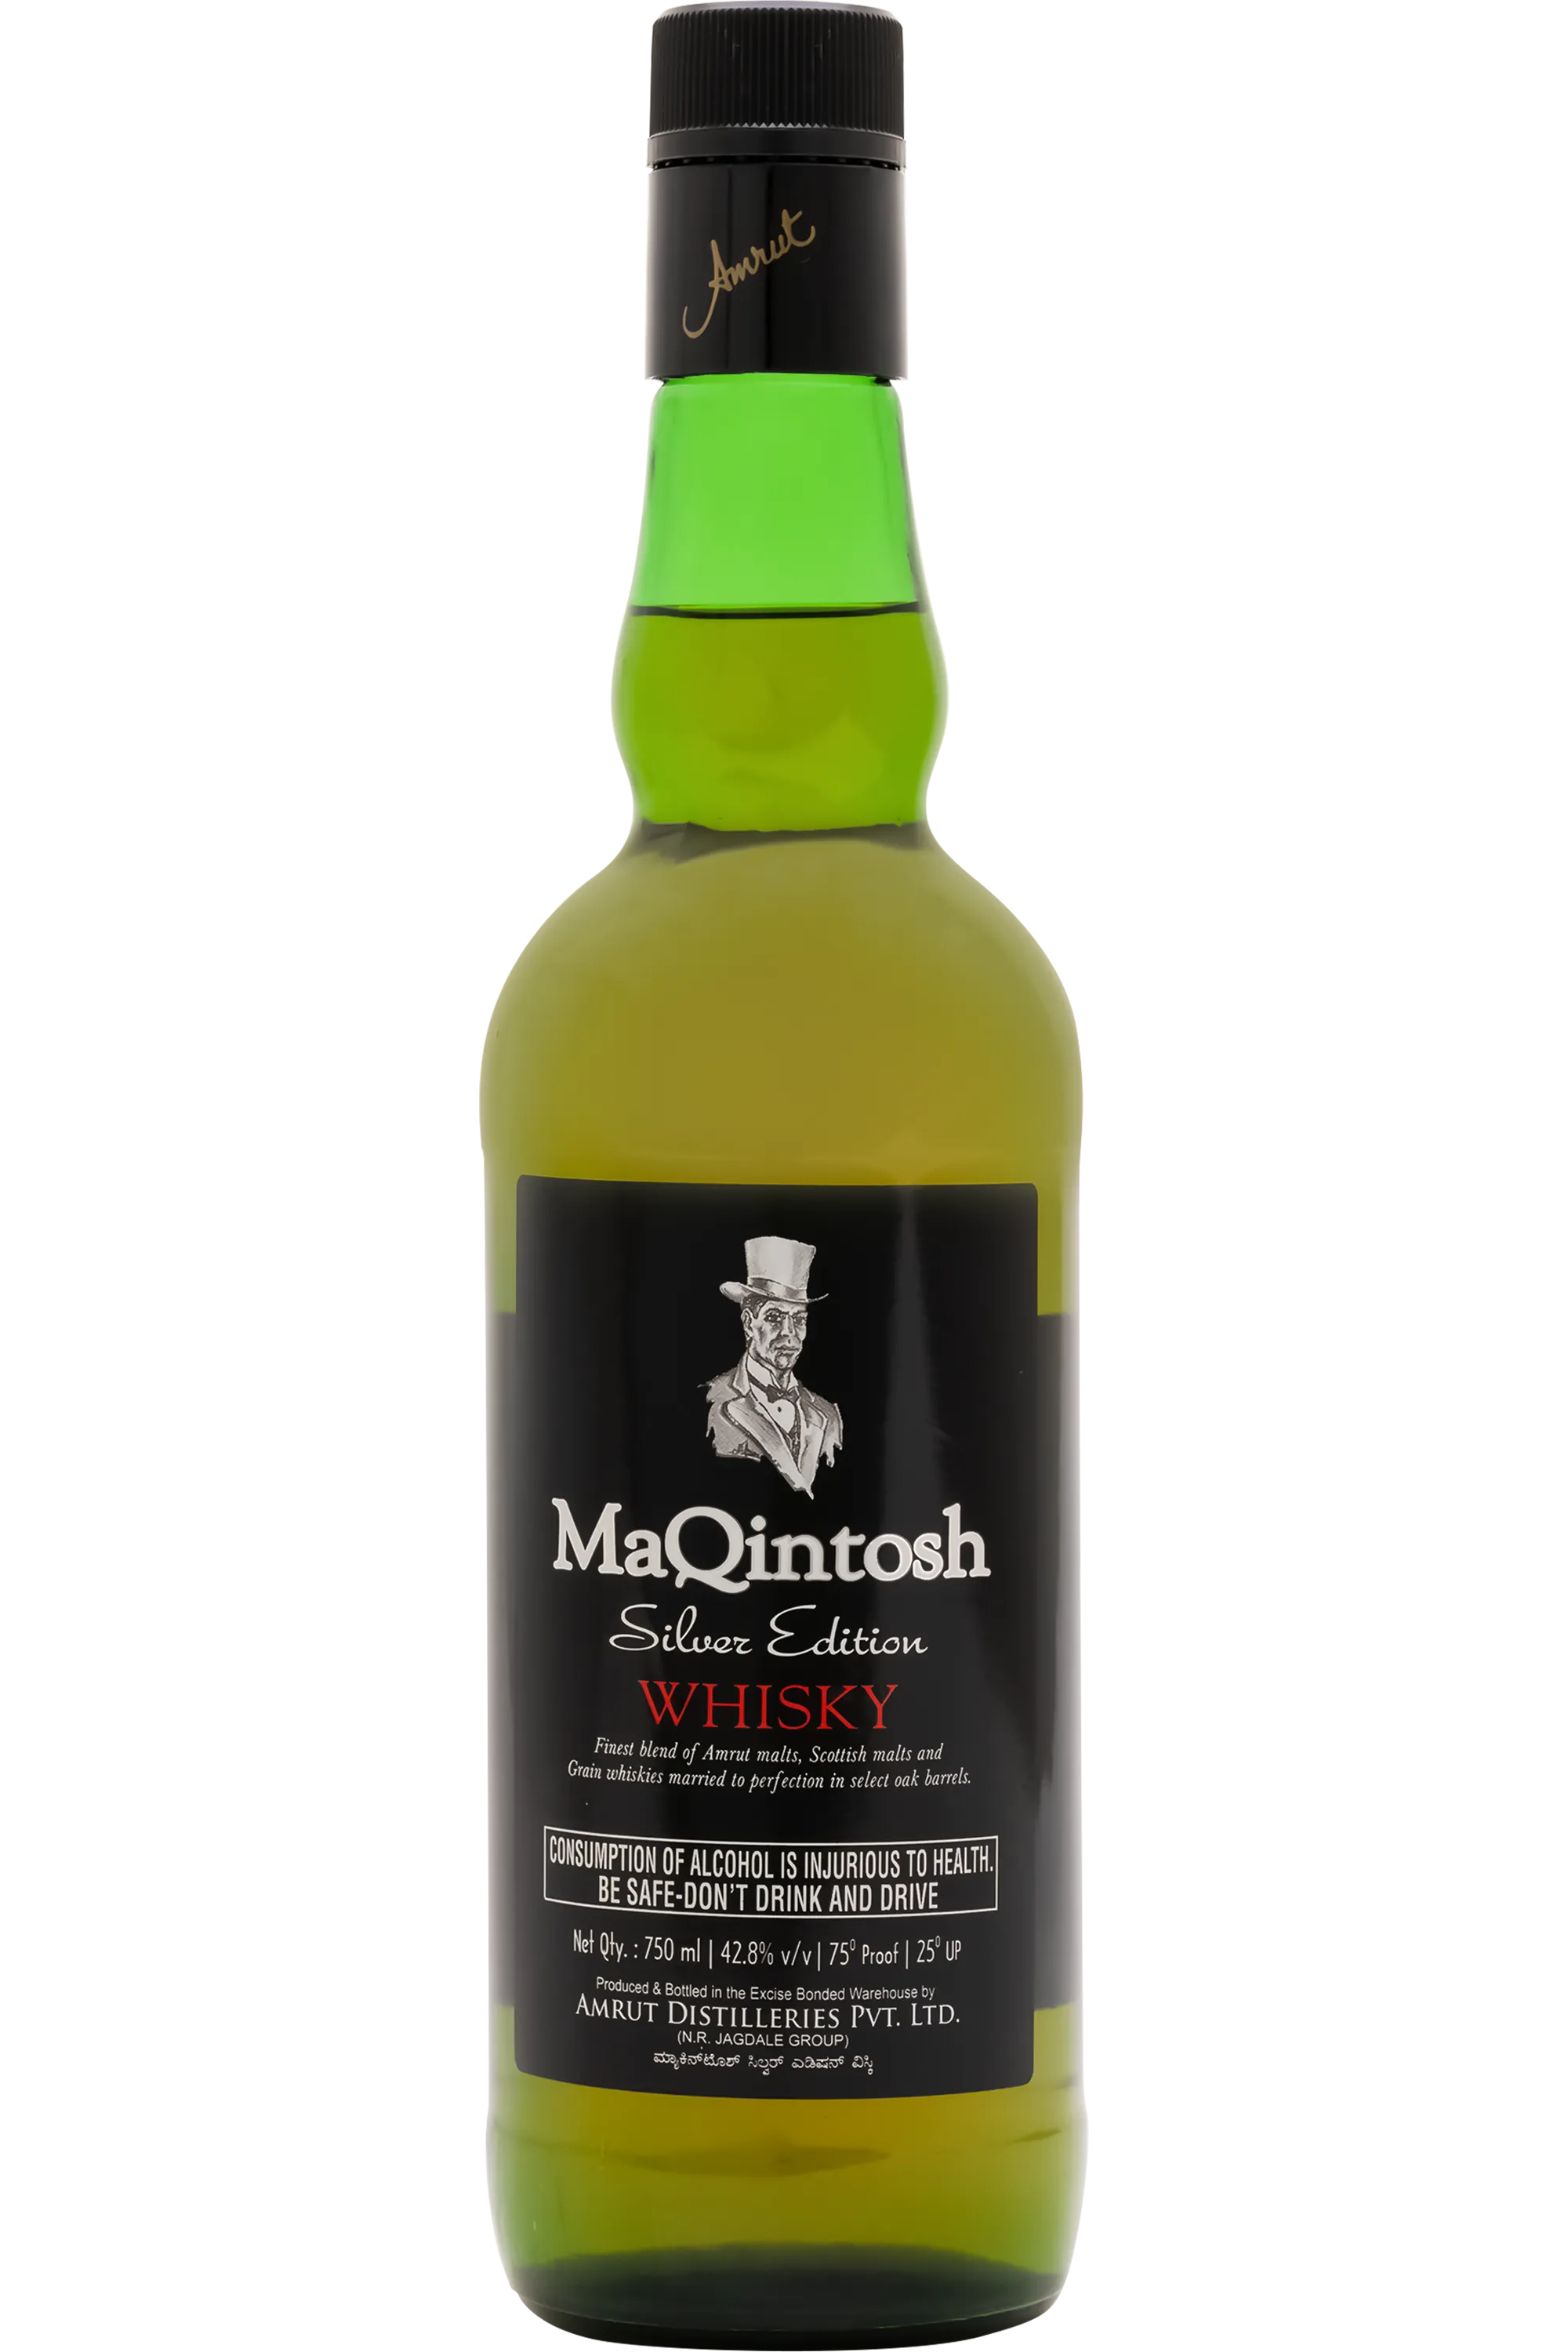 Buy Maqintosh Silver Edition whisky Available in 750ml